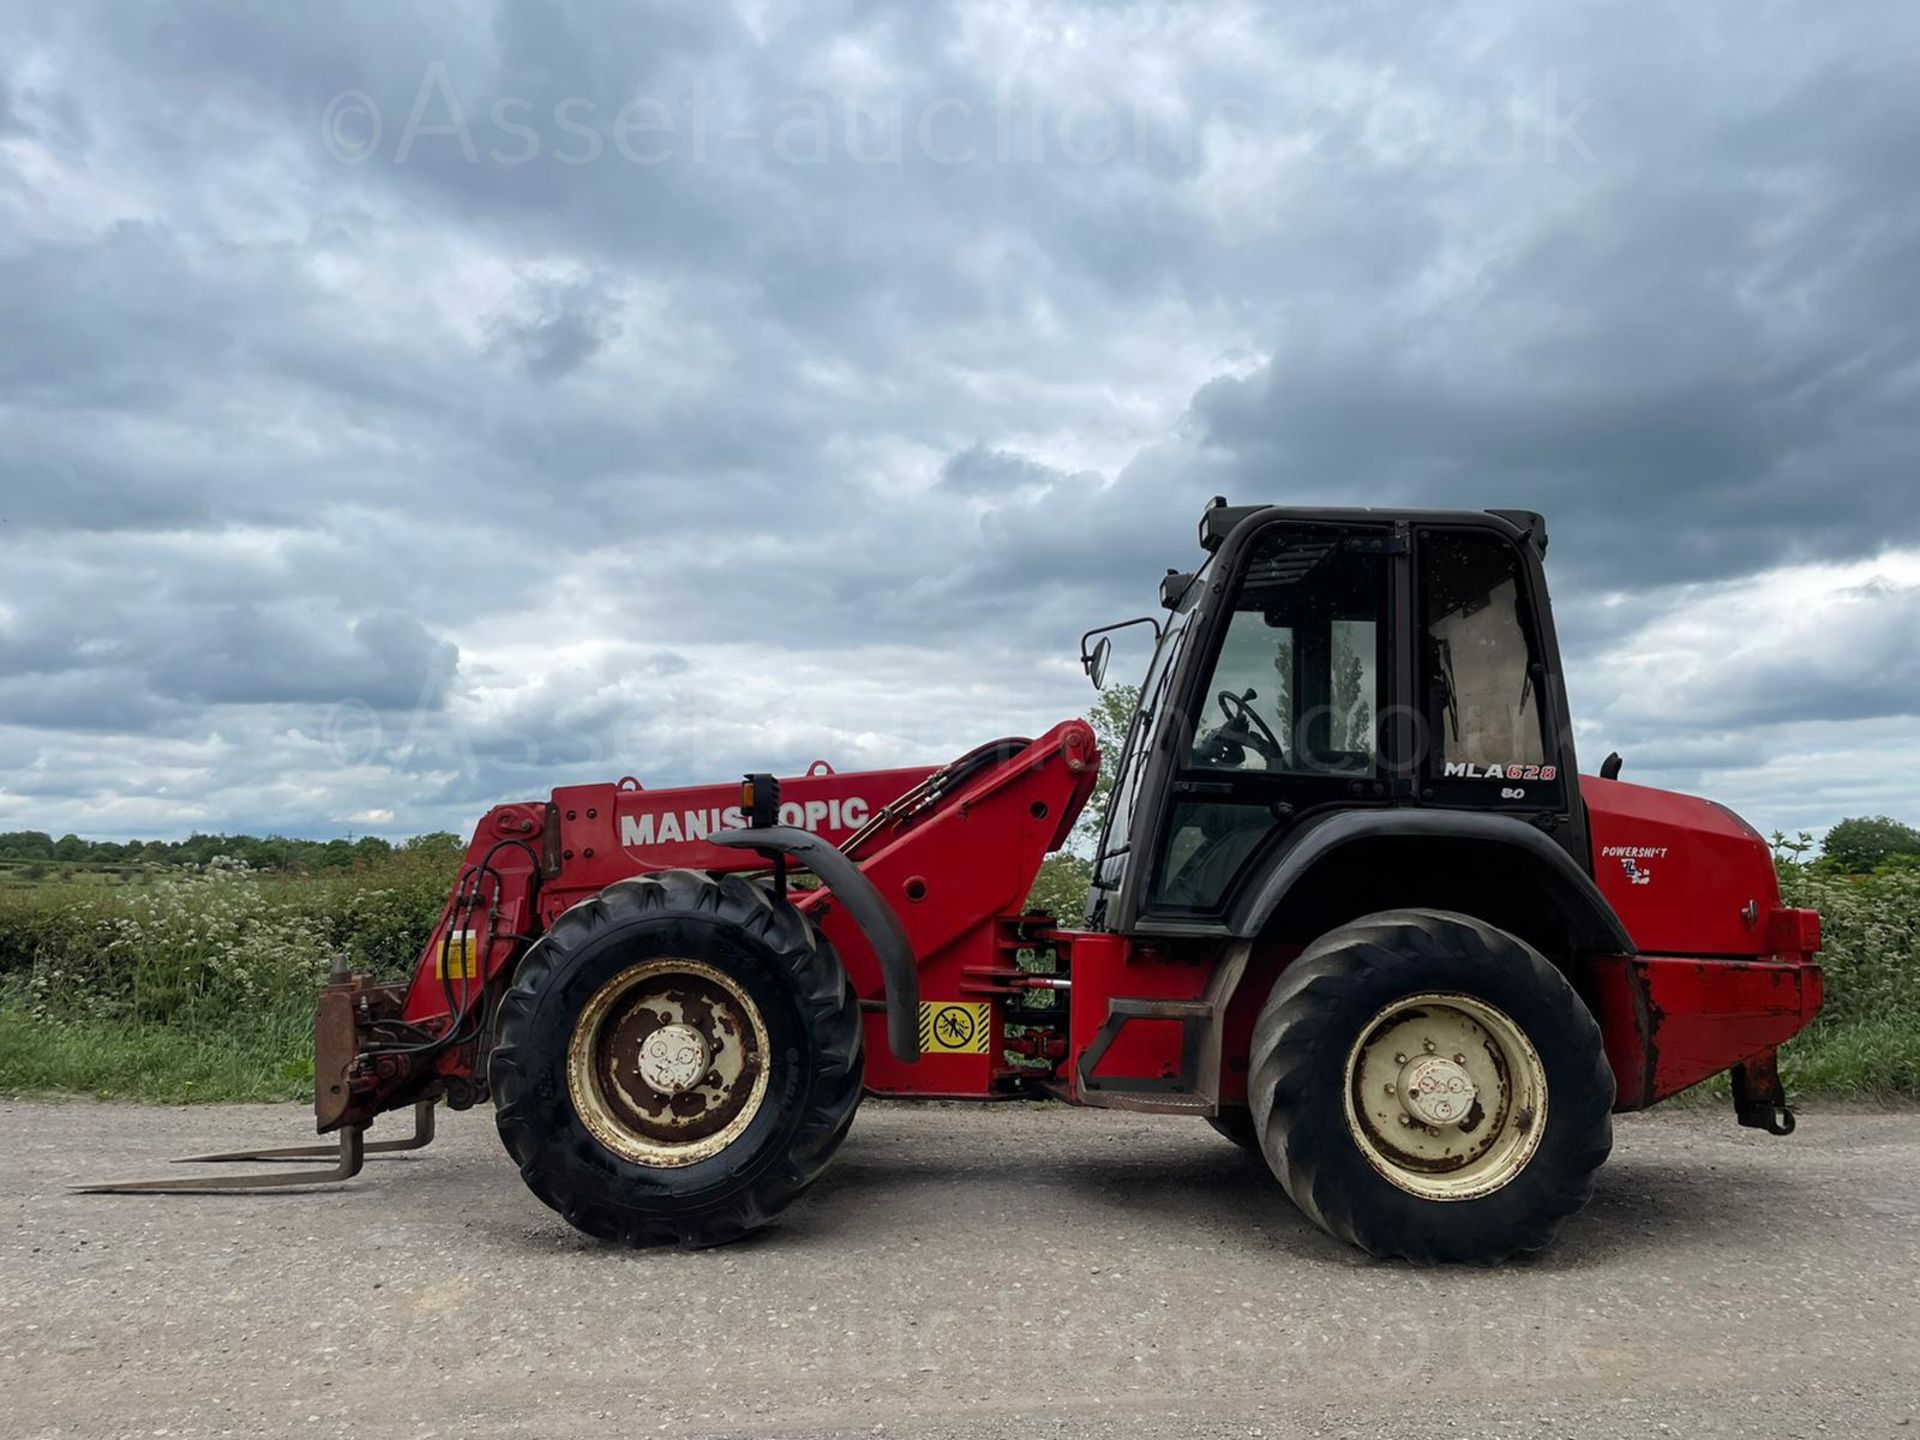 2000 MANITOU MLA 628 ARTICULATED TELESCOPIC TELEHANDLER, RUNS DRIVES AND LIFTS *PLUS VAT* - Image 2 of 26